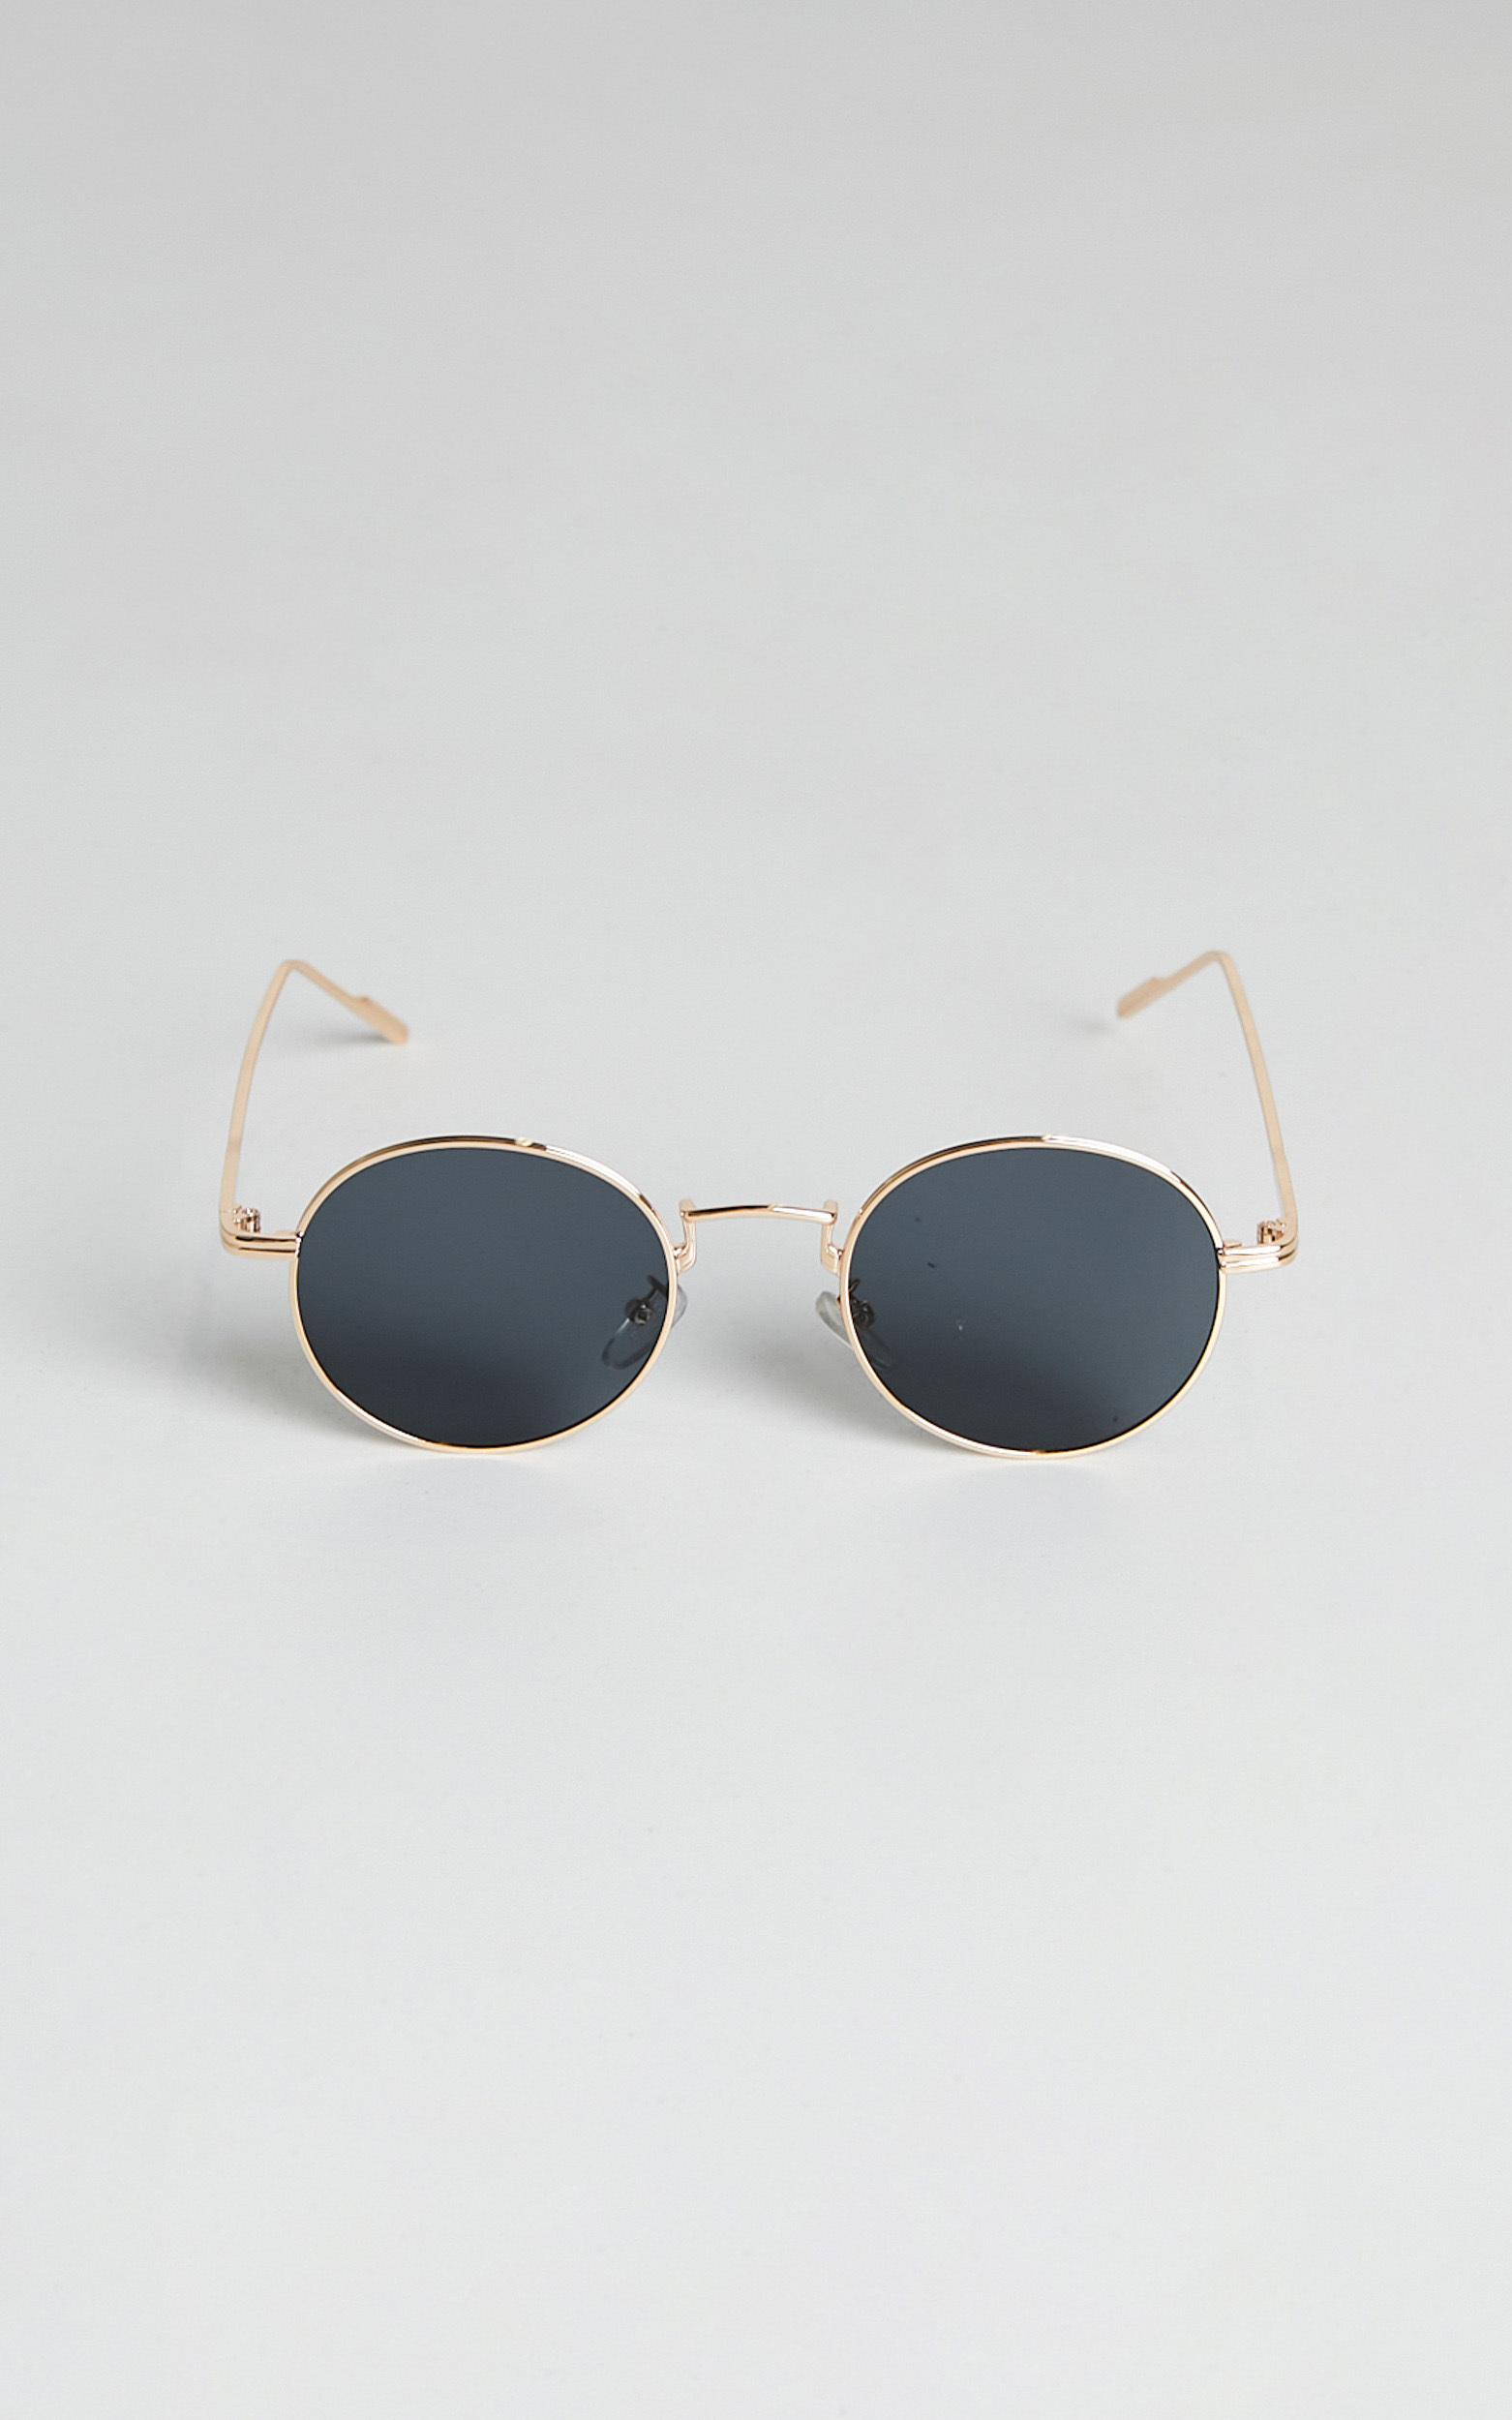 Cecelia Round Sunglasses in Black and Gold - NoSize, BLK2, hi-res image number null